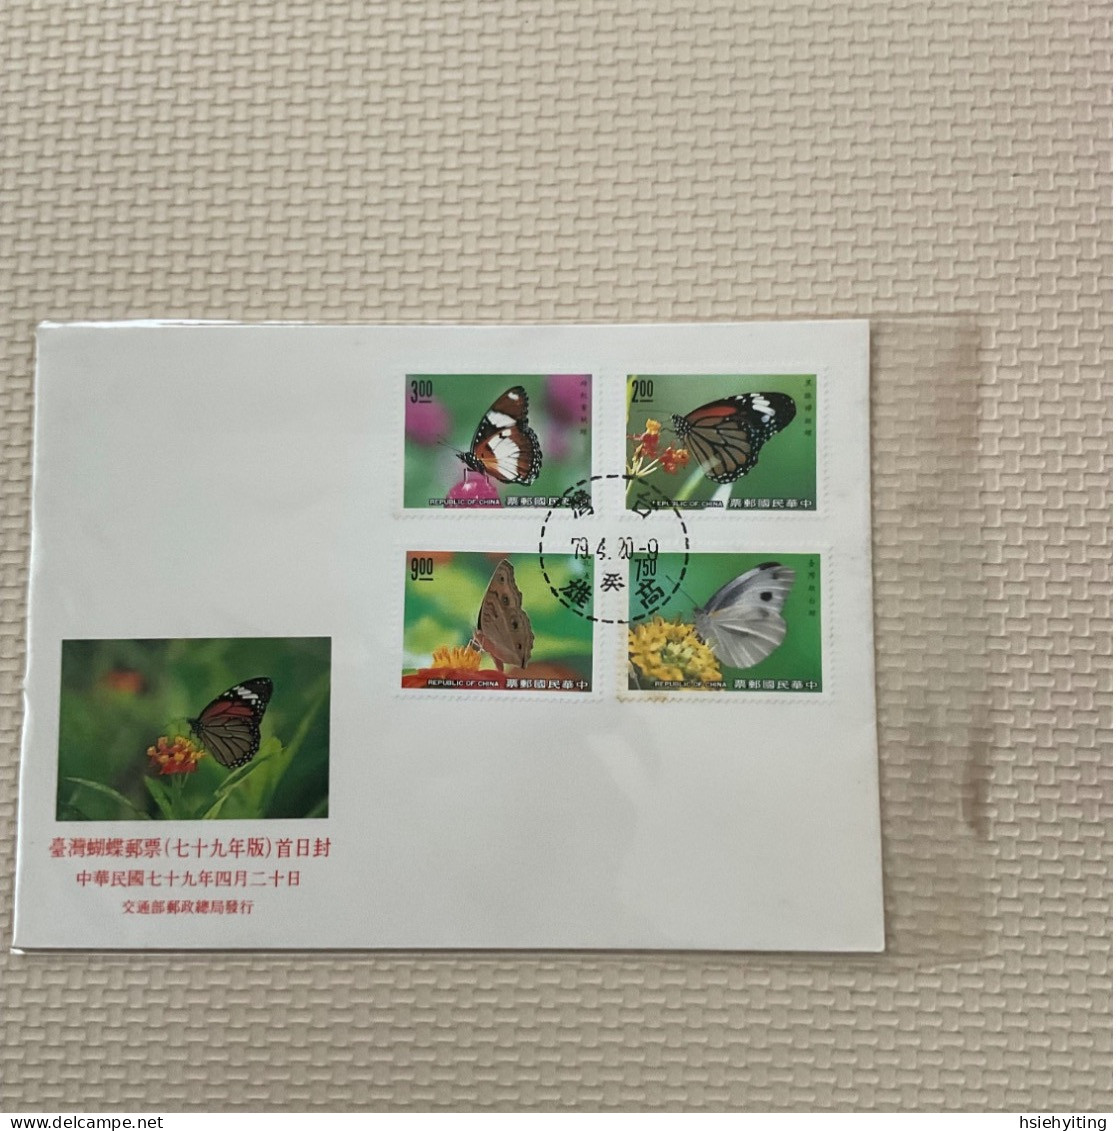 Taiwan Postage Stamps - Farfalle